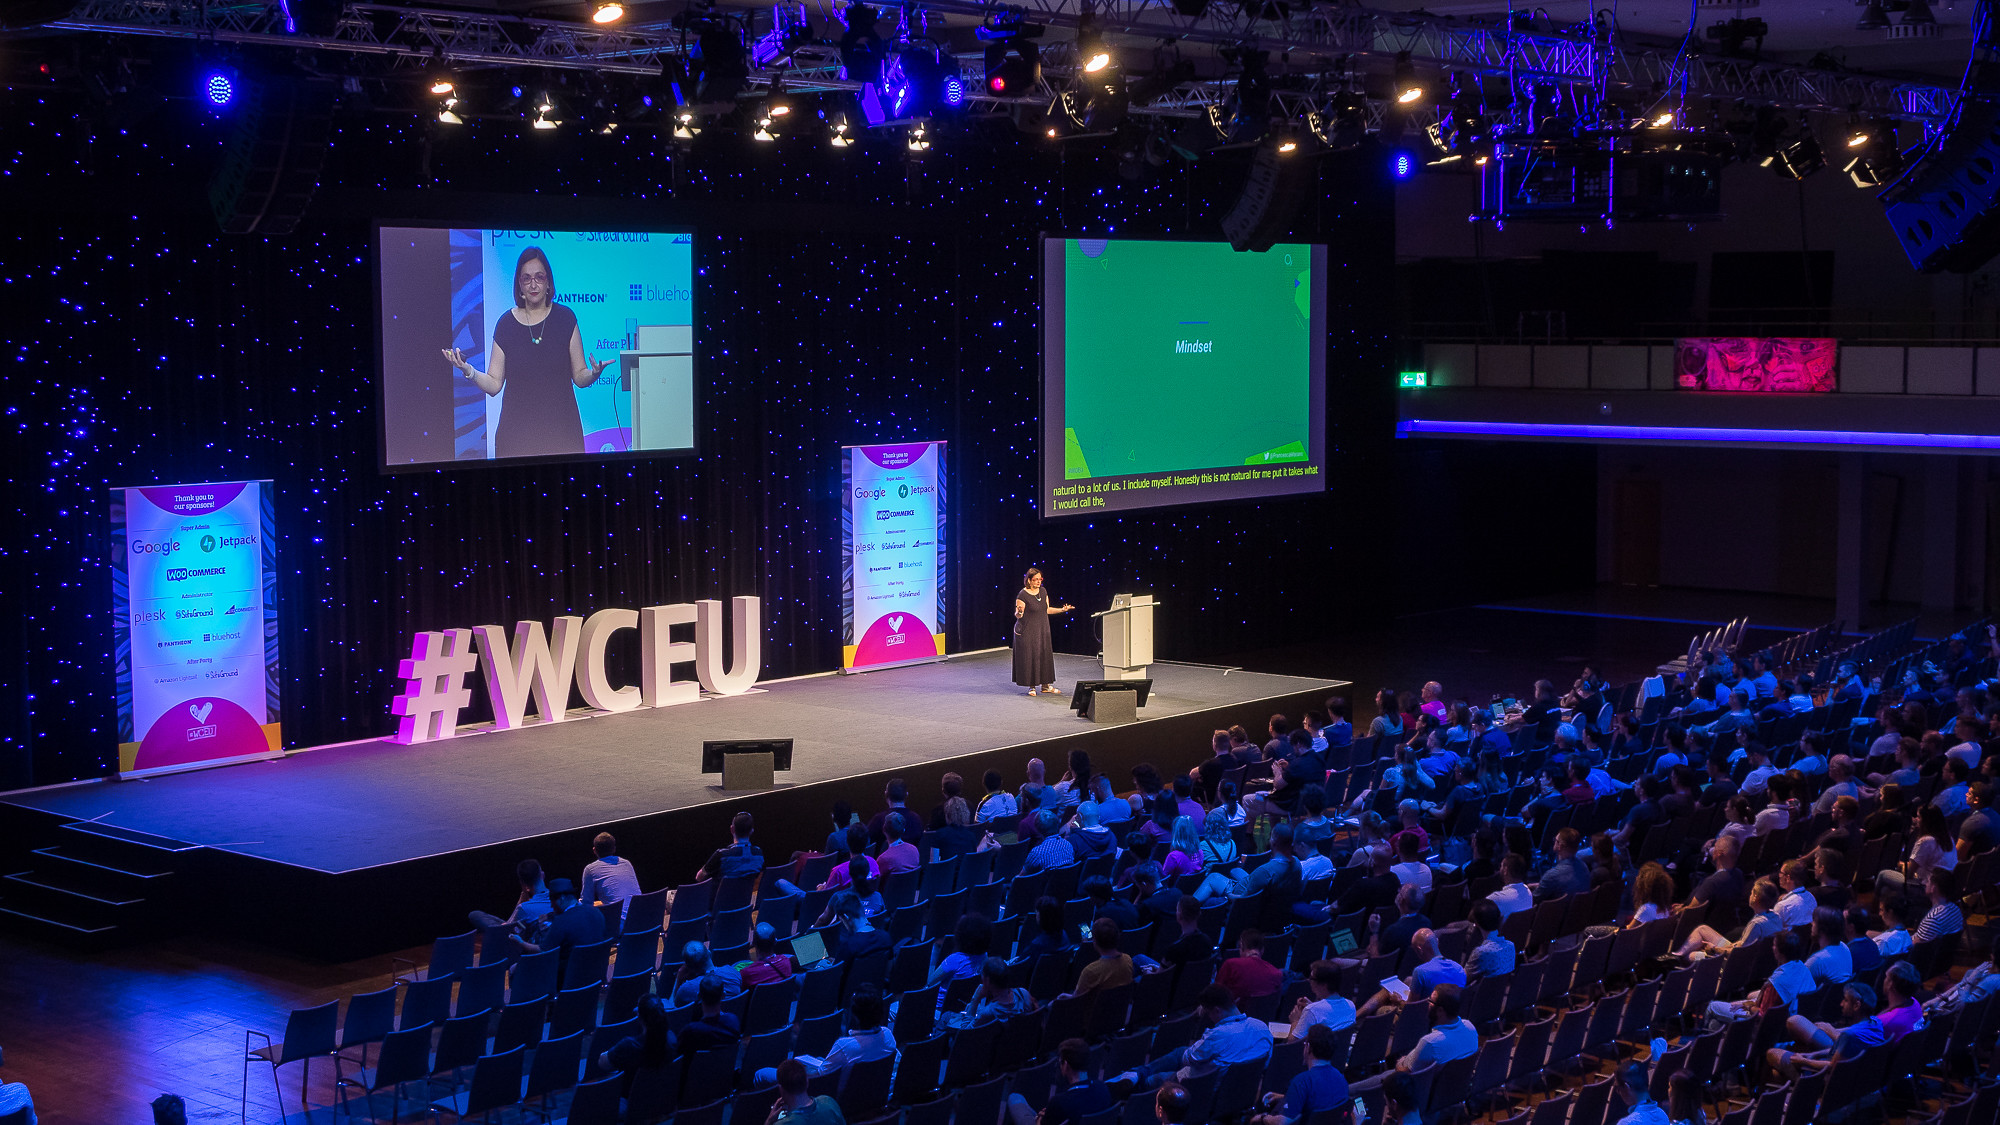 Presenter on stage in the main auditorium of WCEU 2019.